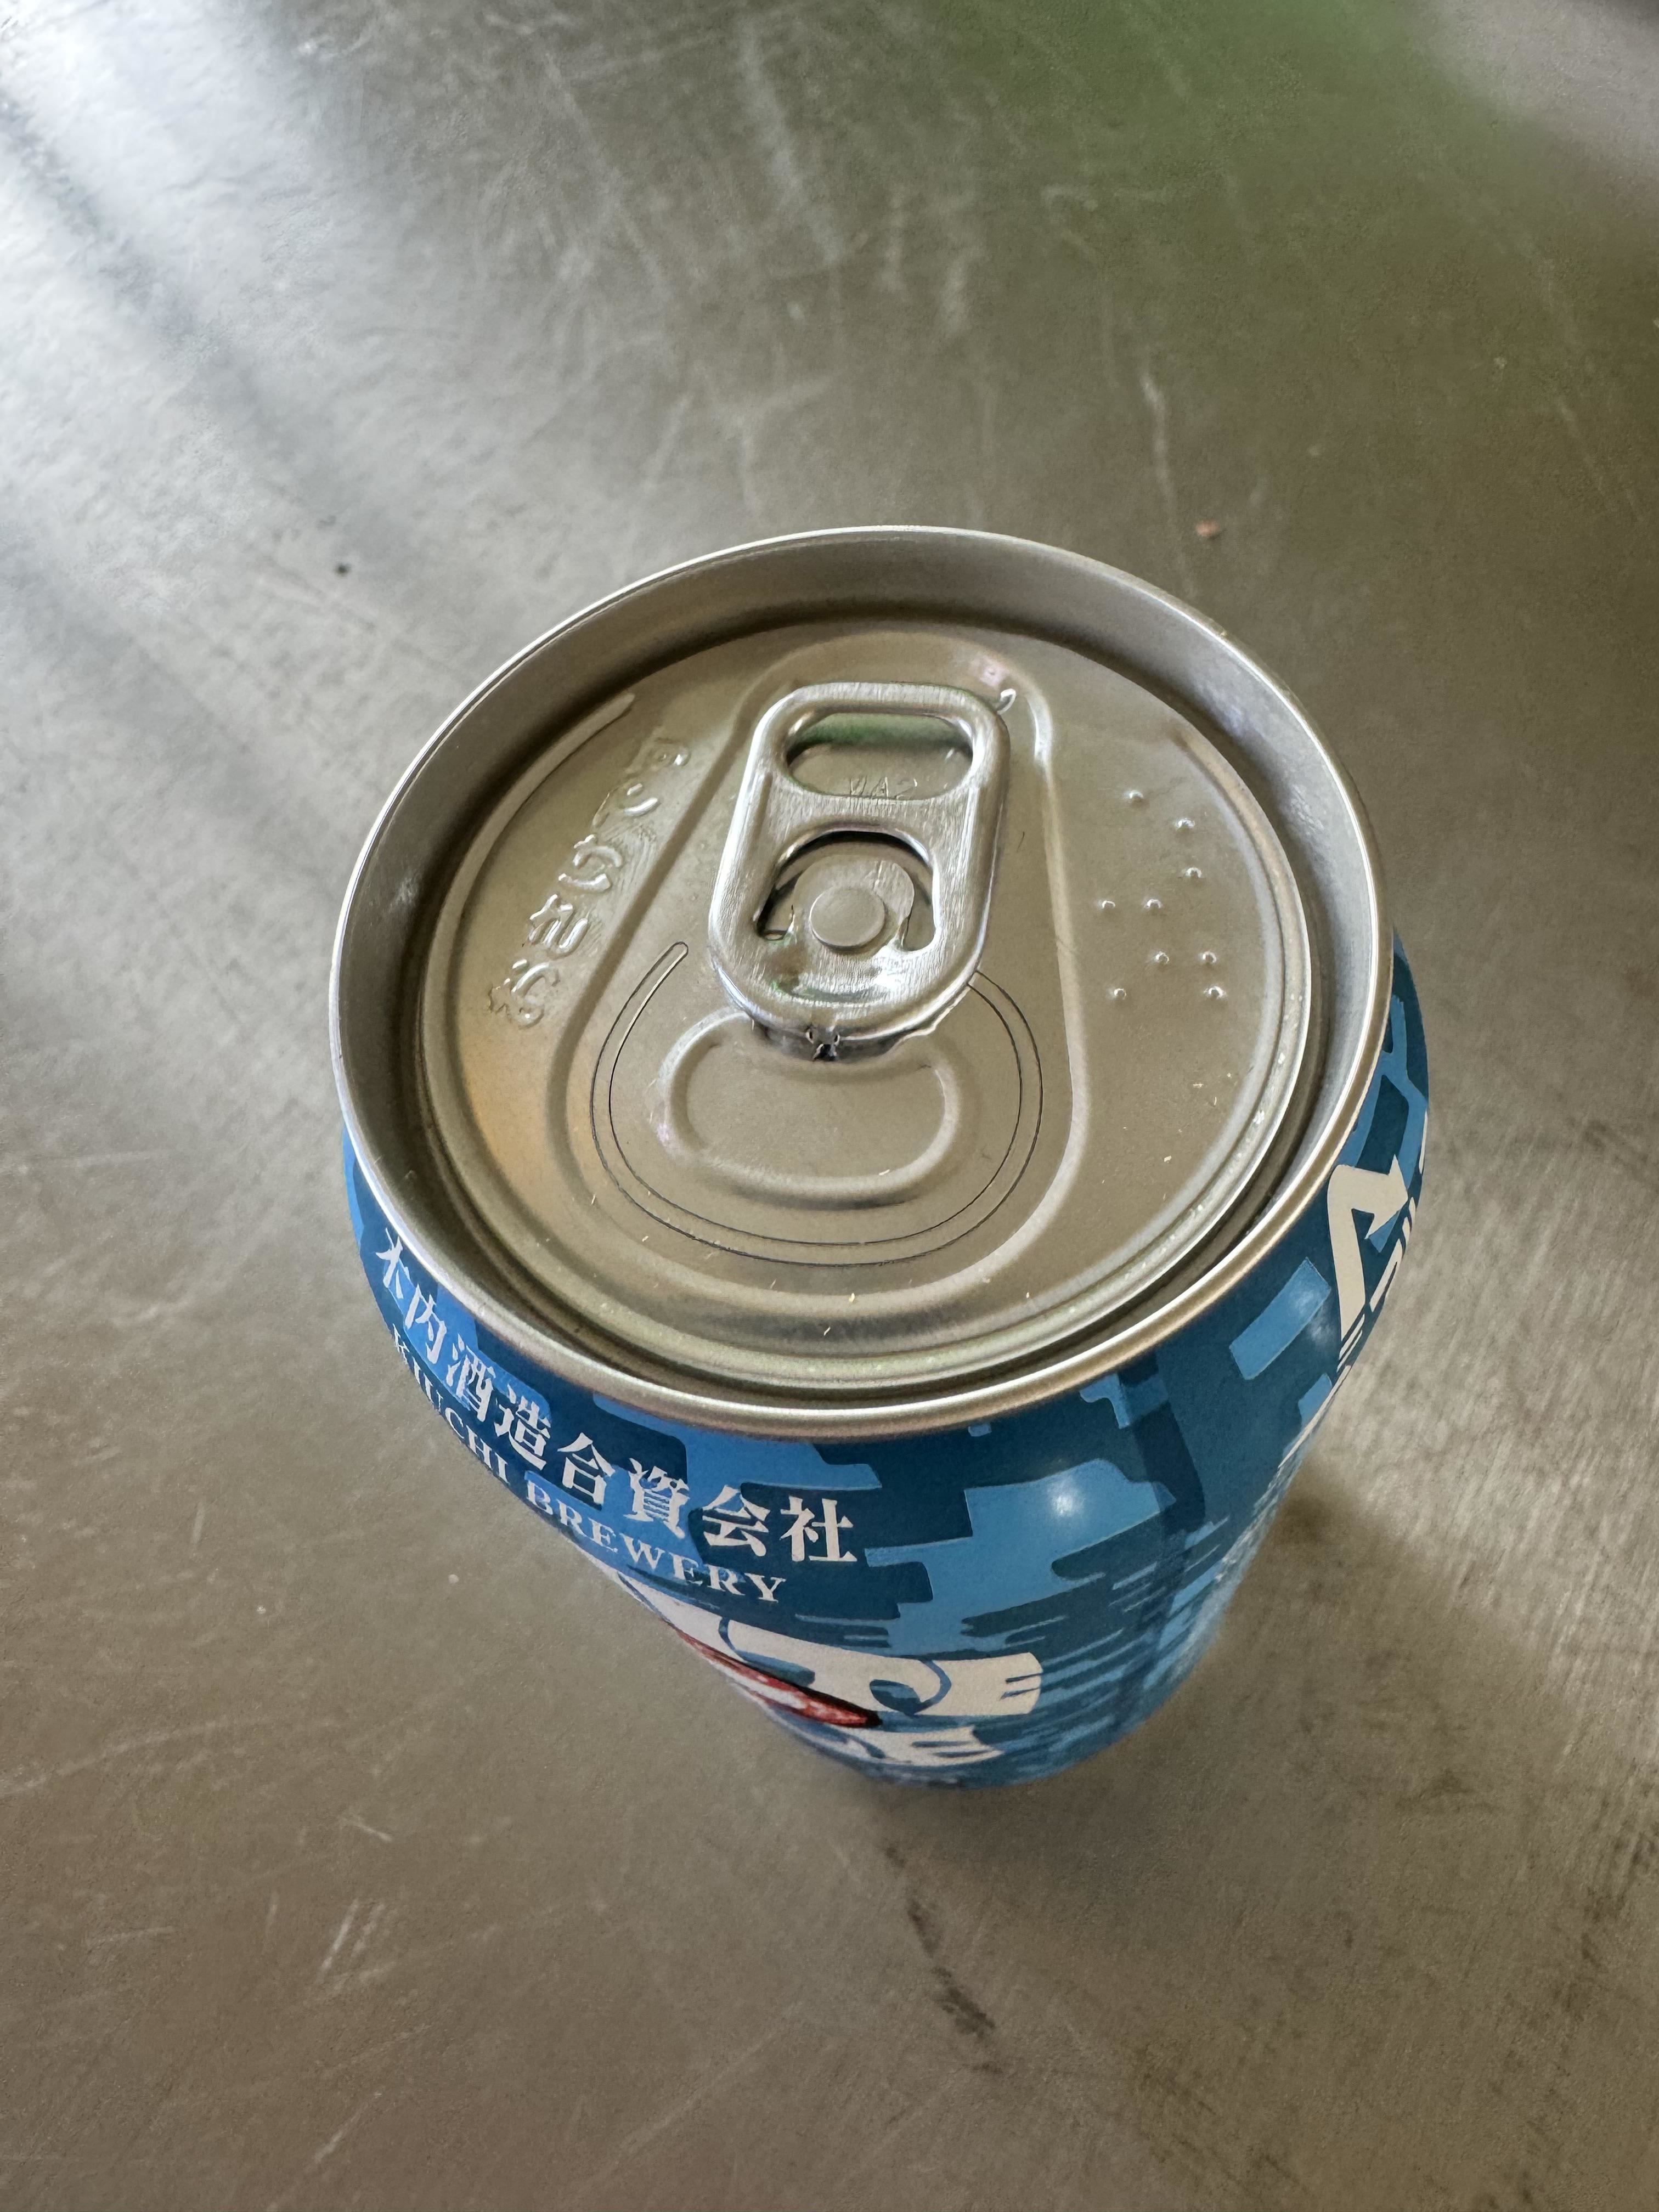 Sealed beverage can with text and graphics, condensation visible on surface